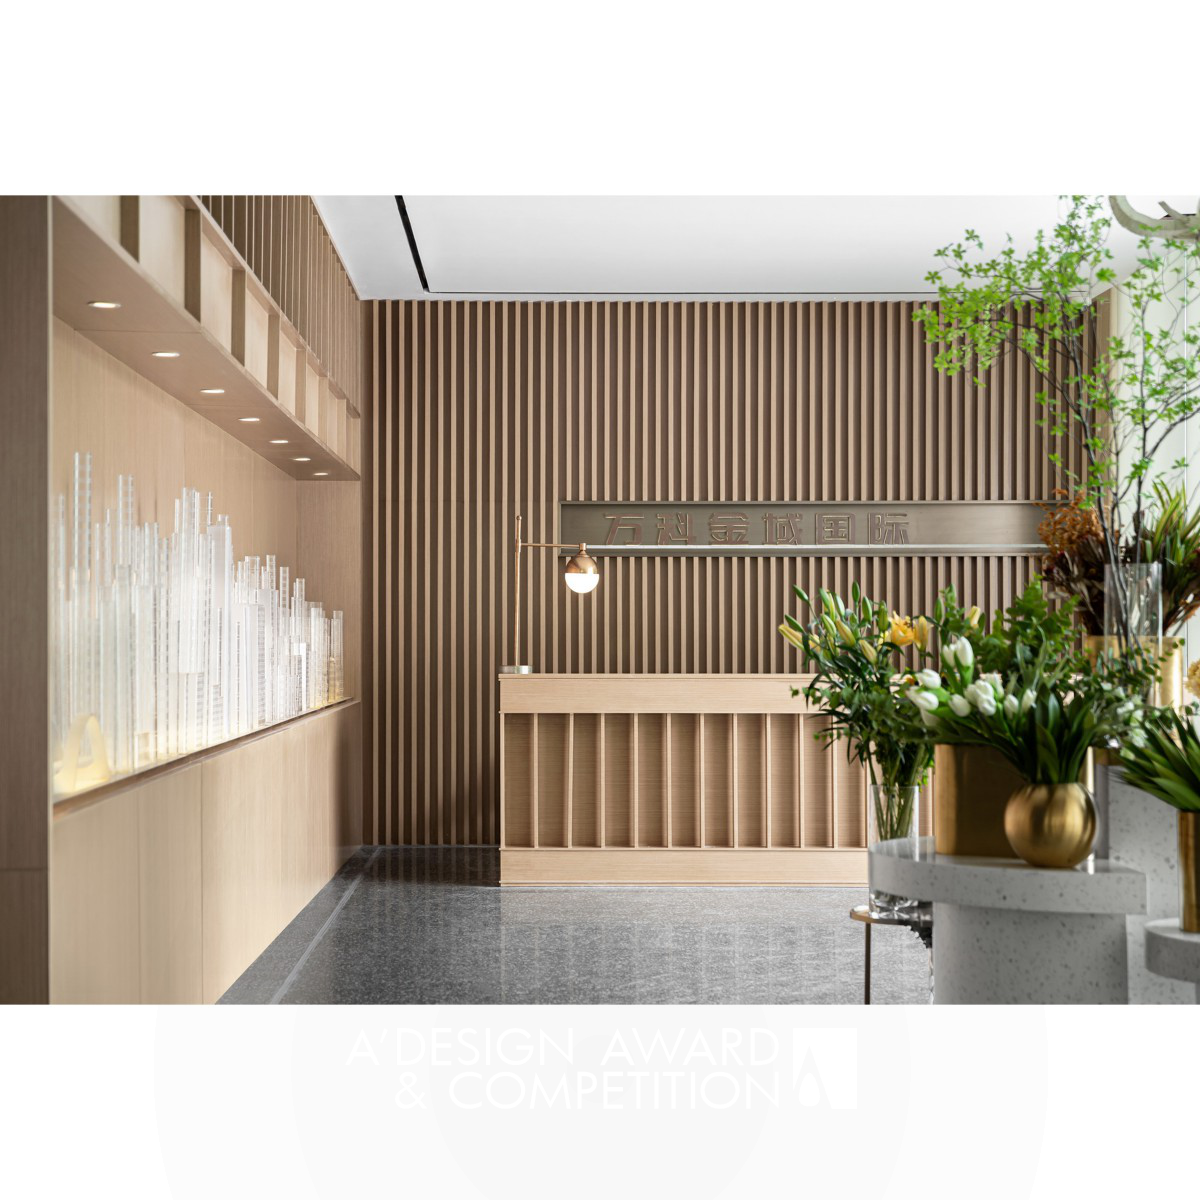 Vanke Golden Mile Sales Office by Ping Zhou